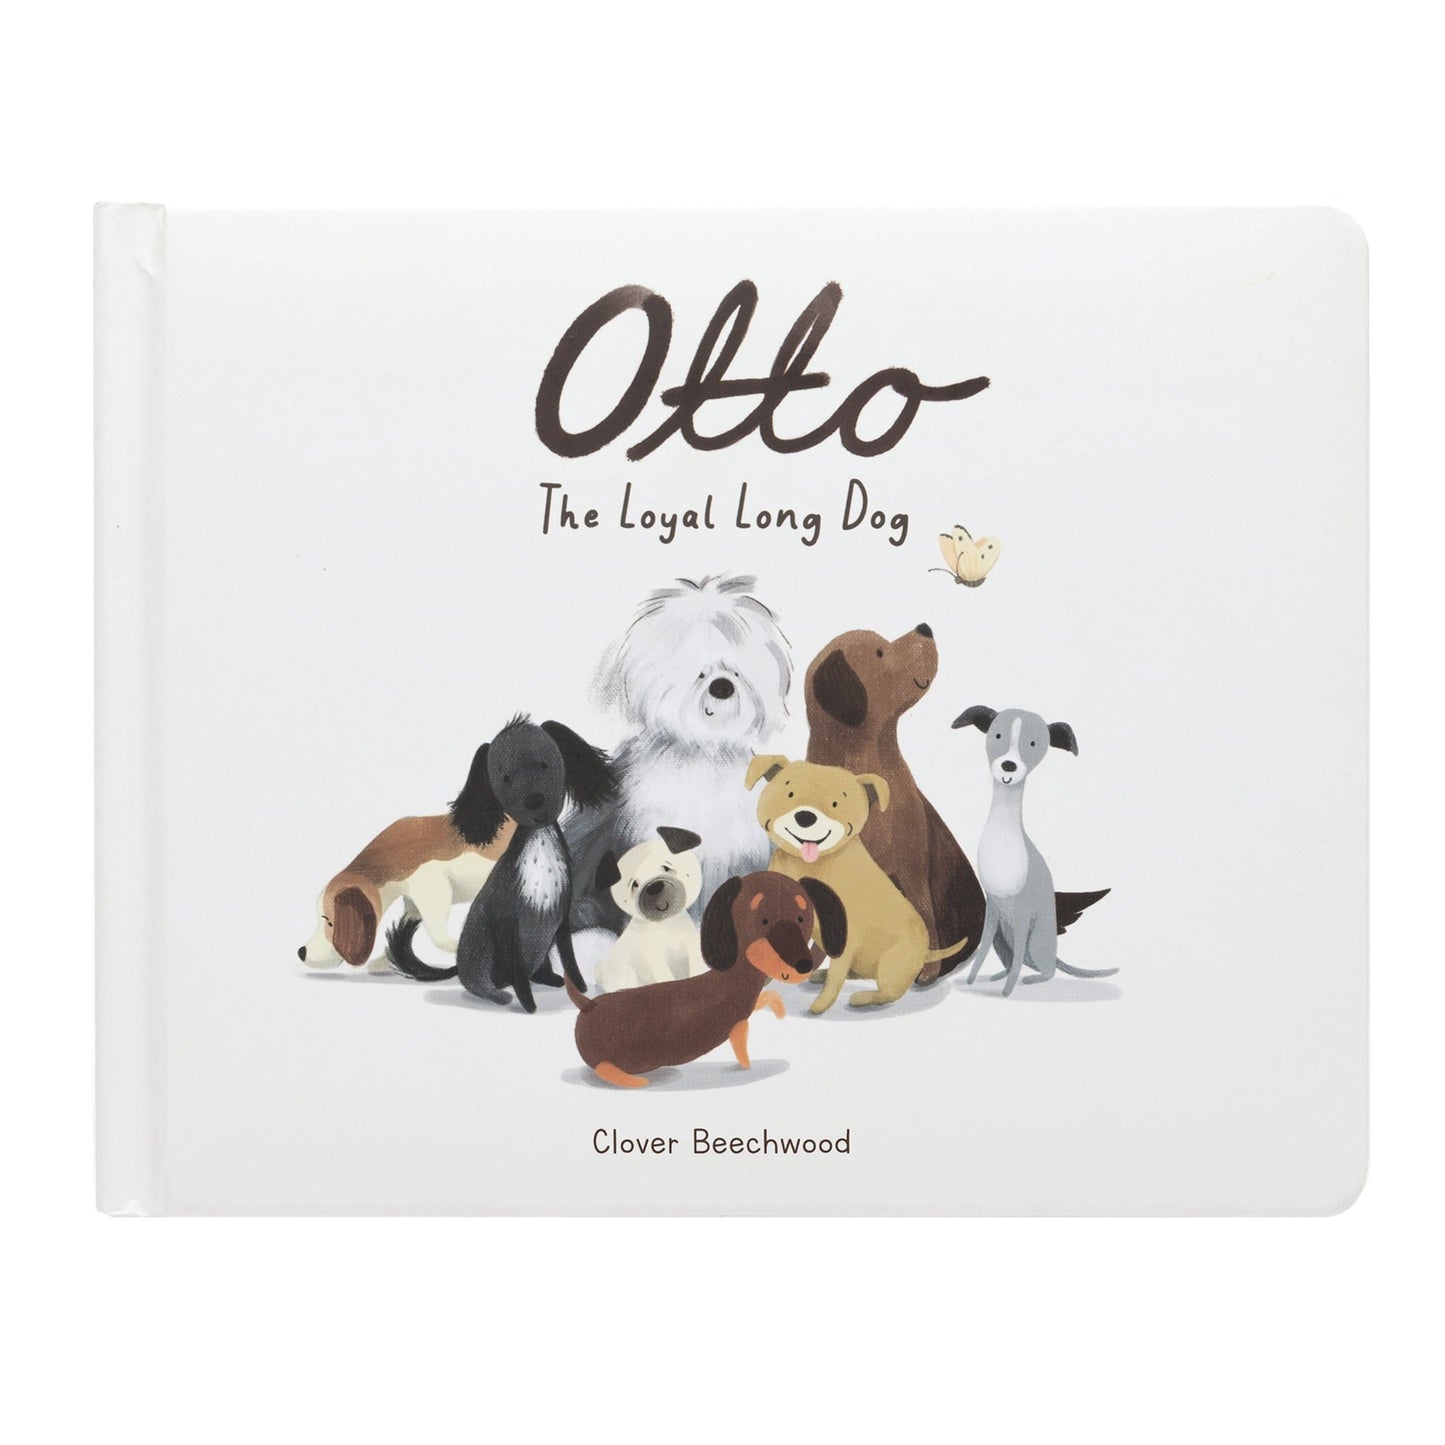 "Otto The Loyal Long Dog" Children's Book